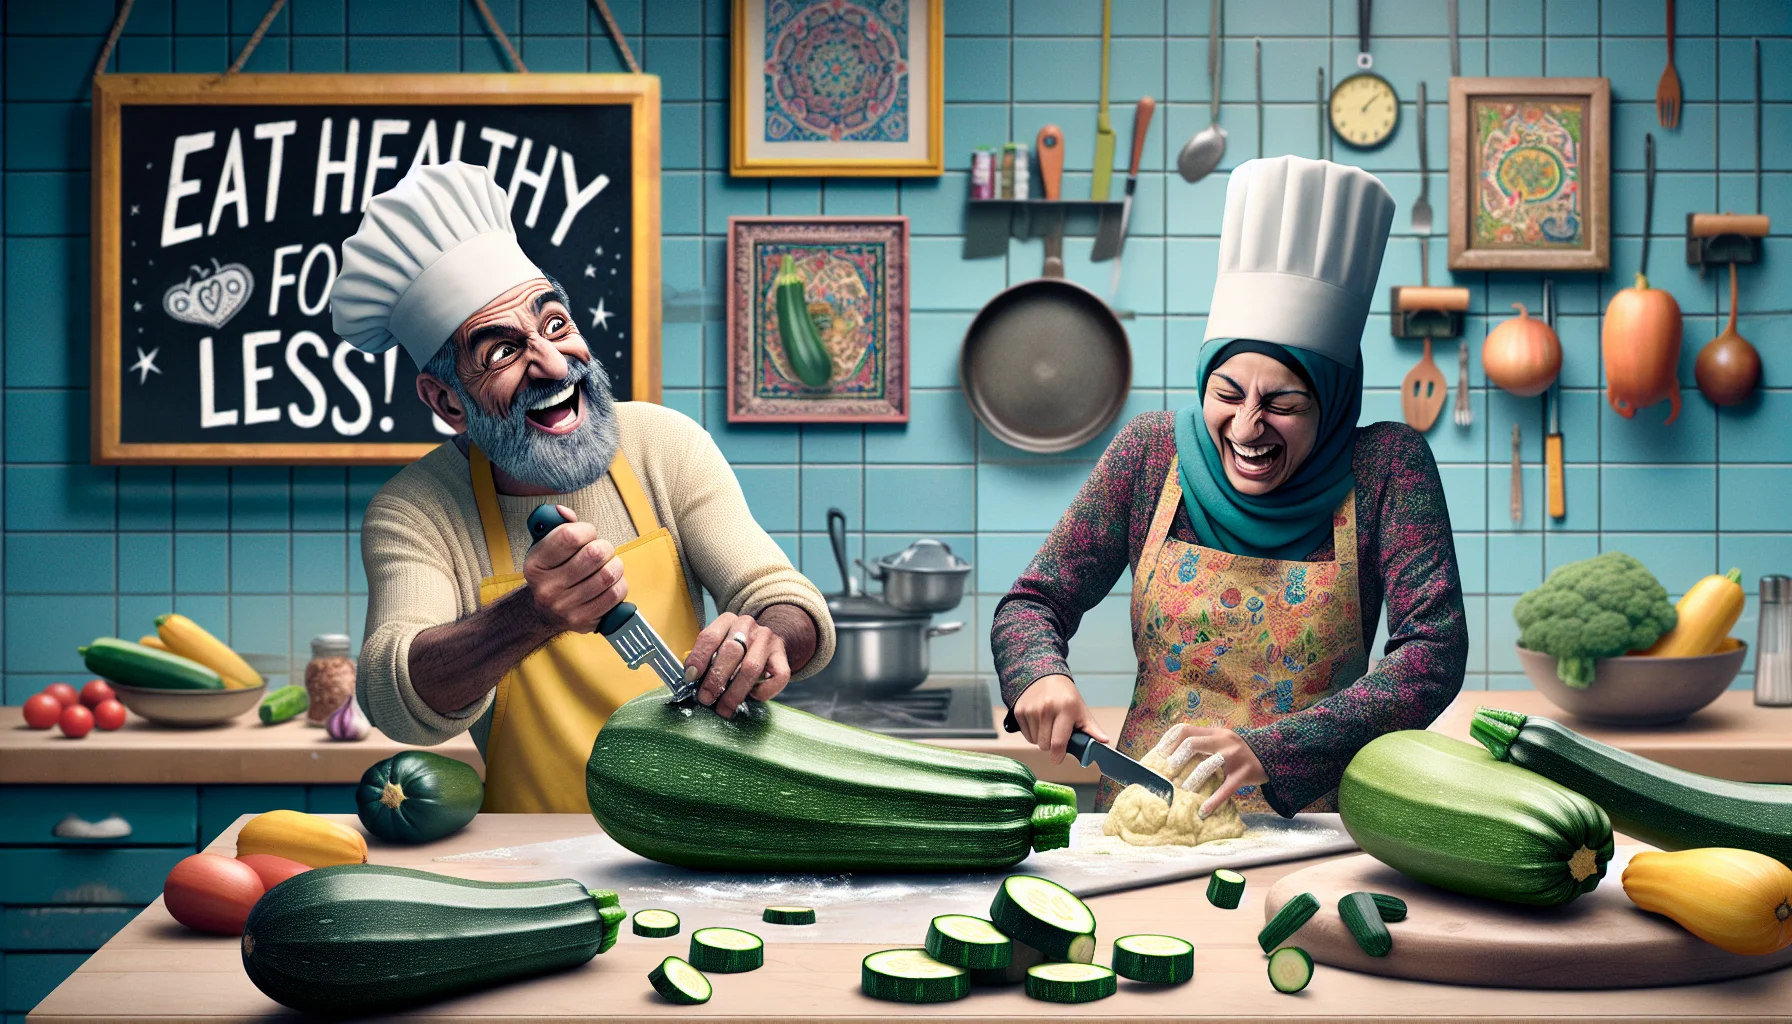 Imagine a humorous, colorful, and dynamic scene in a modern kitchen. A man of Hispanic descent and a woman of Middle-Eastern descent, both sporting chef hats and aprons, are working together to prepare a delicious zucchini bread. The man is comedically struggling to peel a giant zucchini, using a regular-sized peeler, and the woman is laughing while kneading the bread dough. Several zucchinis, some small and others equally large, are strewn around the kitchen. A visible price tag on one of these zucchinis demonstrates their affordable nature. In the background, a chalkboard sign reads 'Eat Healthy for Less!'.